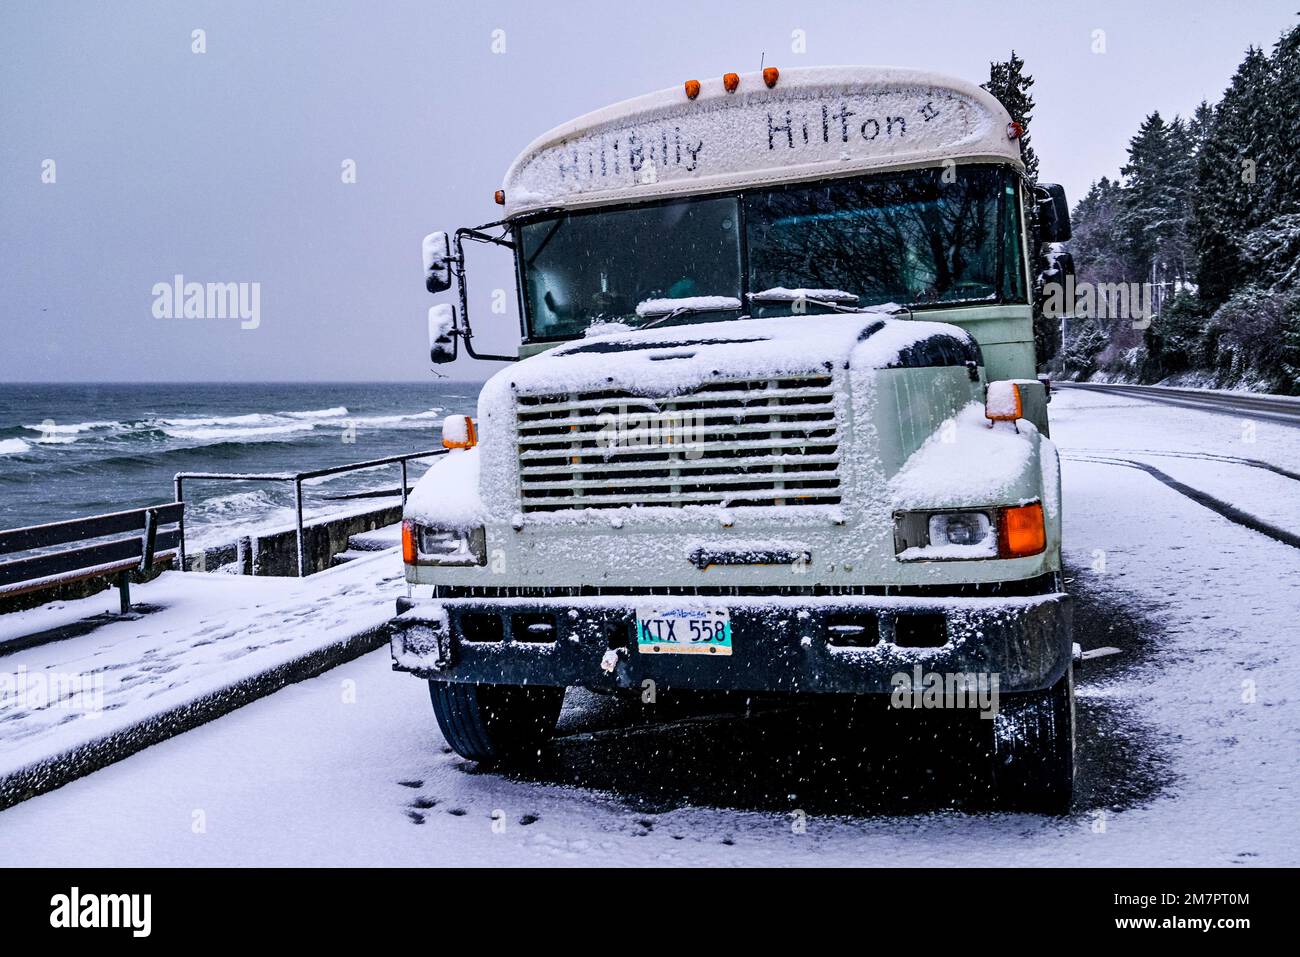 HillBilly Hilton, old school bus, parked at Qualicum Beach in snowstorm, Vancouver Island, British Columbia, Canada Stock Photo